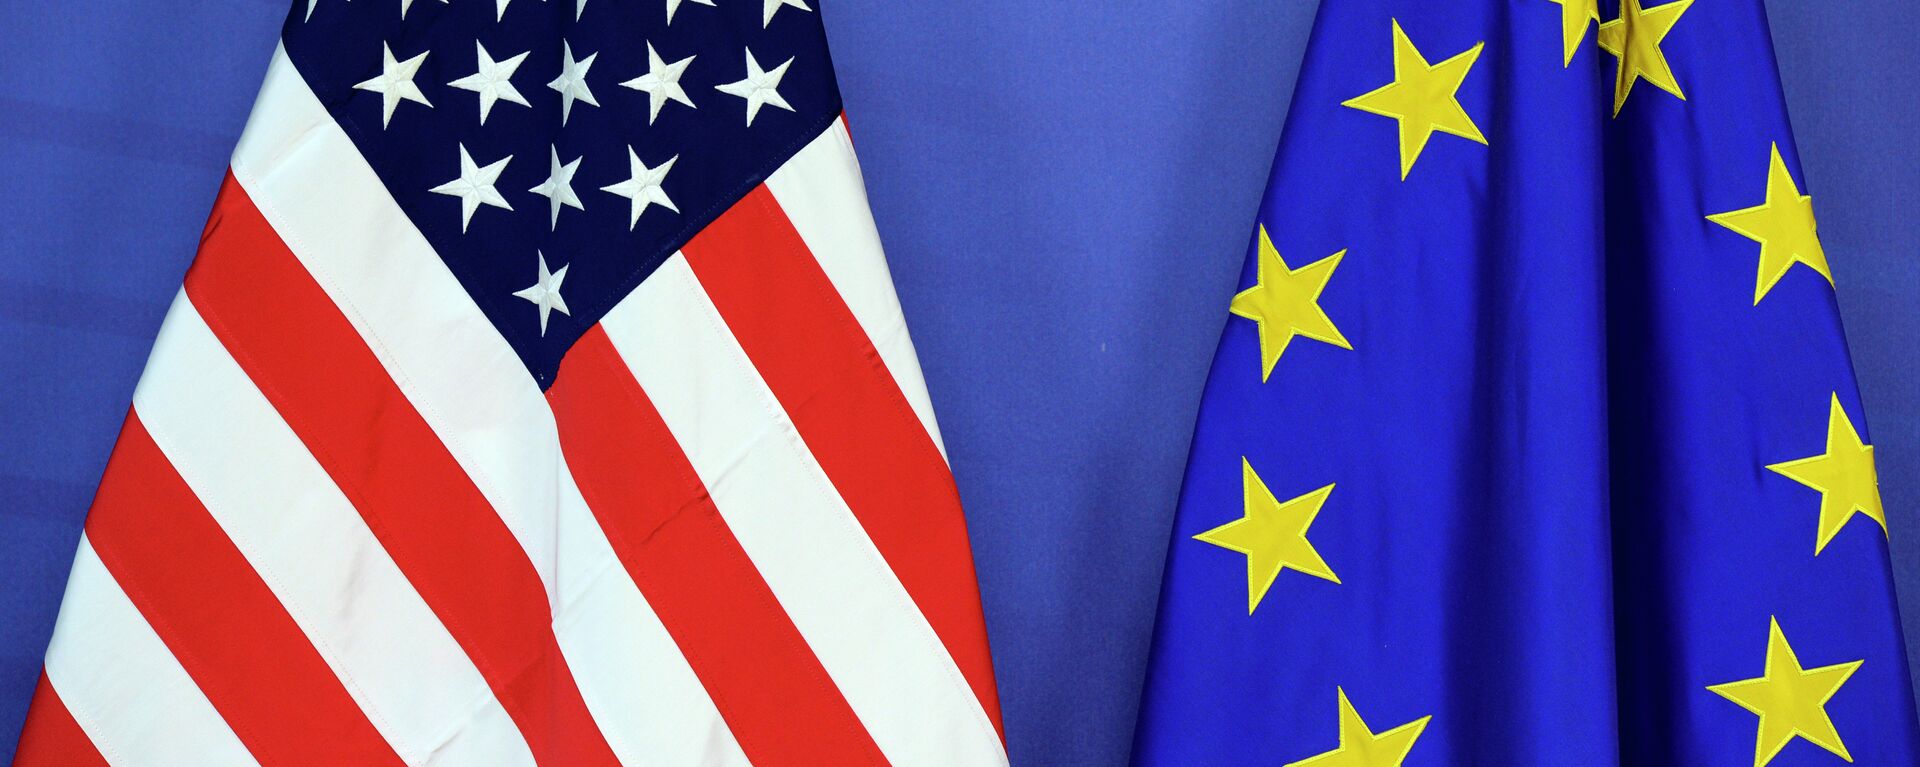 The US national flag (L) and the flag of the European Union are placed side-by-side during the Transatlantic Trade and Investment Partnership (TTIP) meeting at the European Union Commission headquarter in Brussels, on July 13, 2015 - Sputnik Mundo, 1920, 19.05.2022